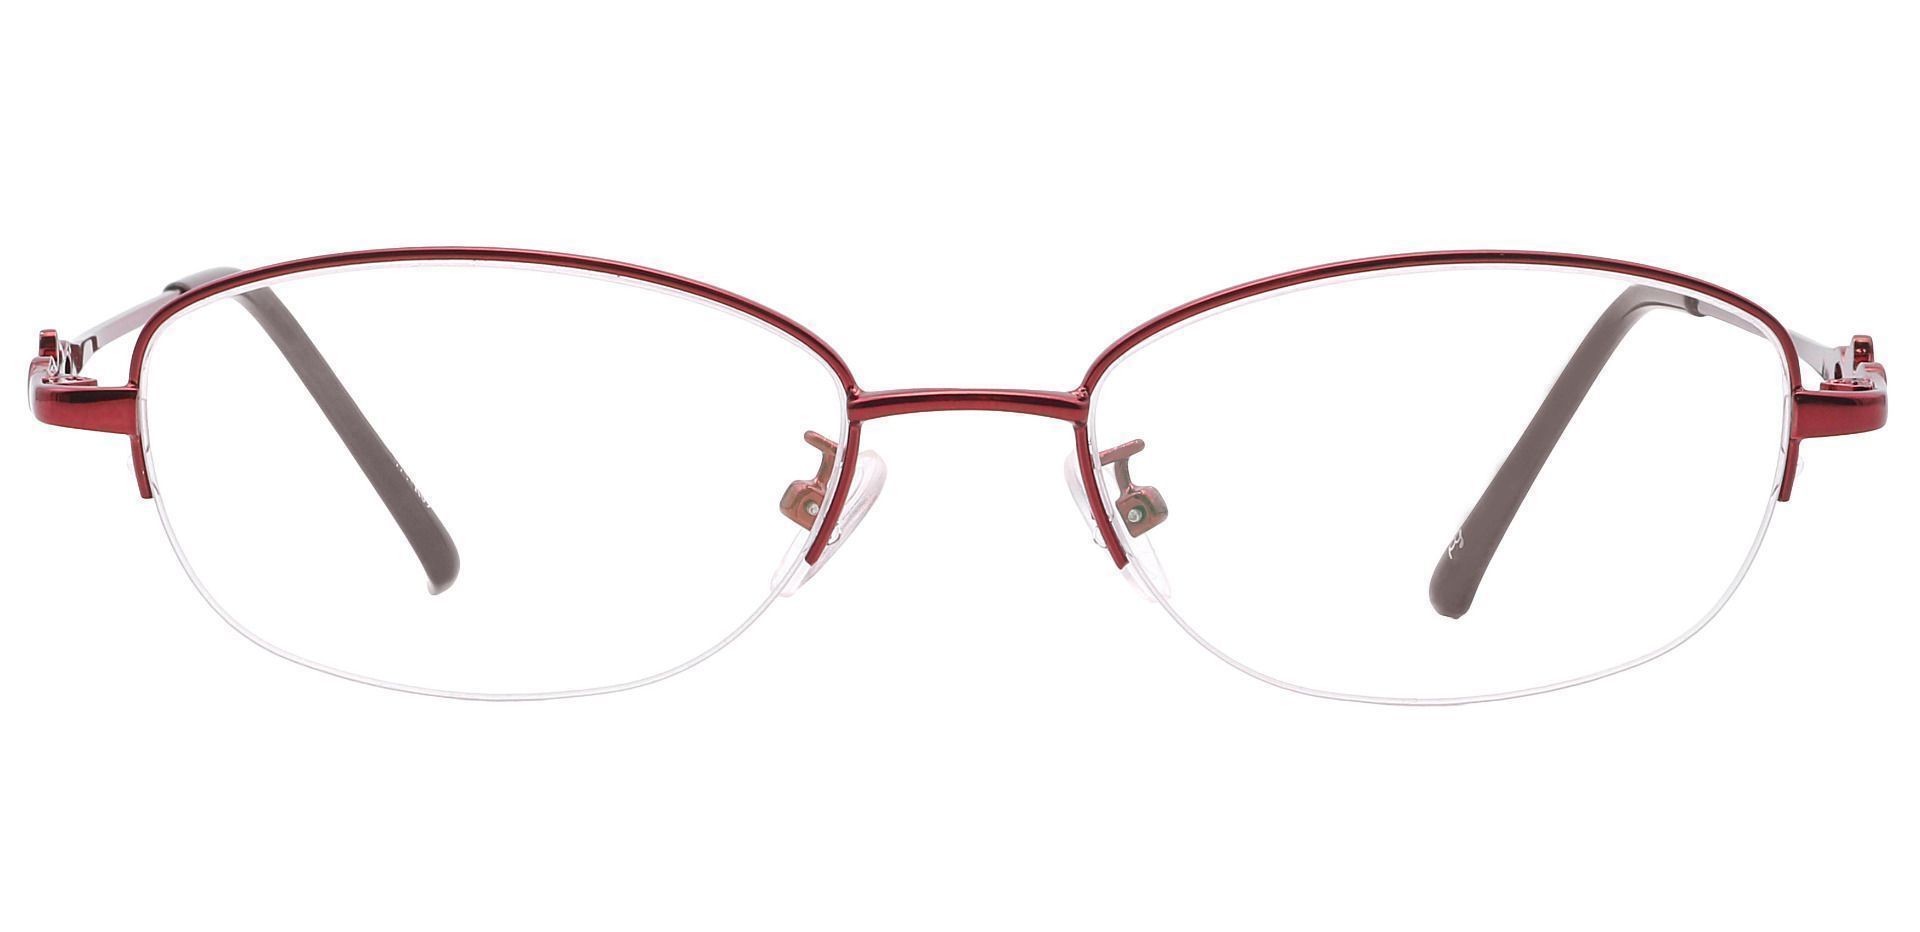 Andie Oval Blue Light Blocking Glasses - Red